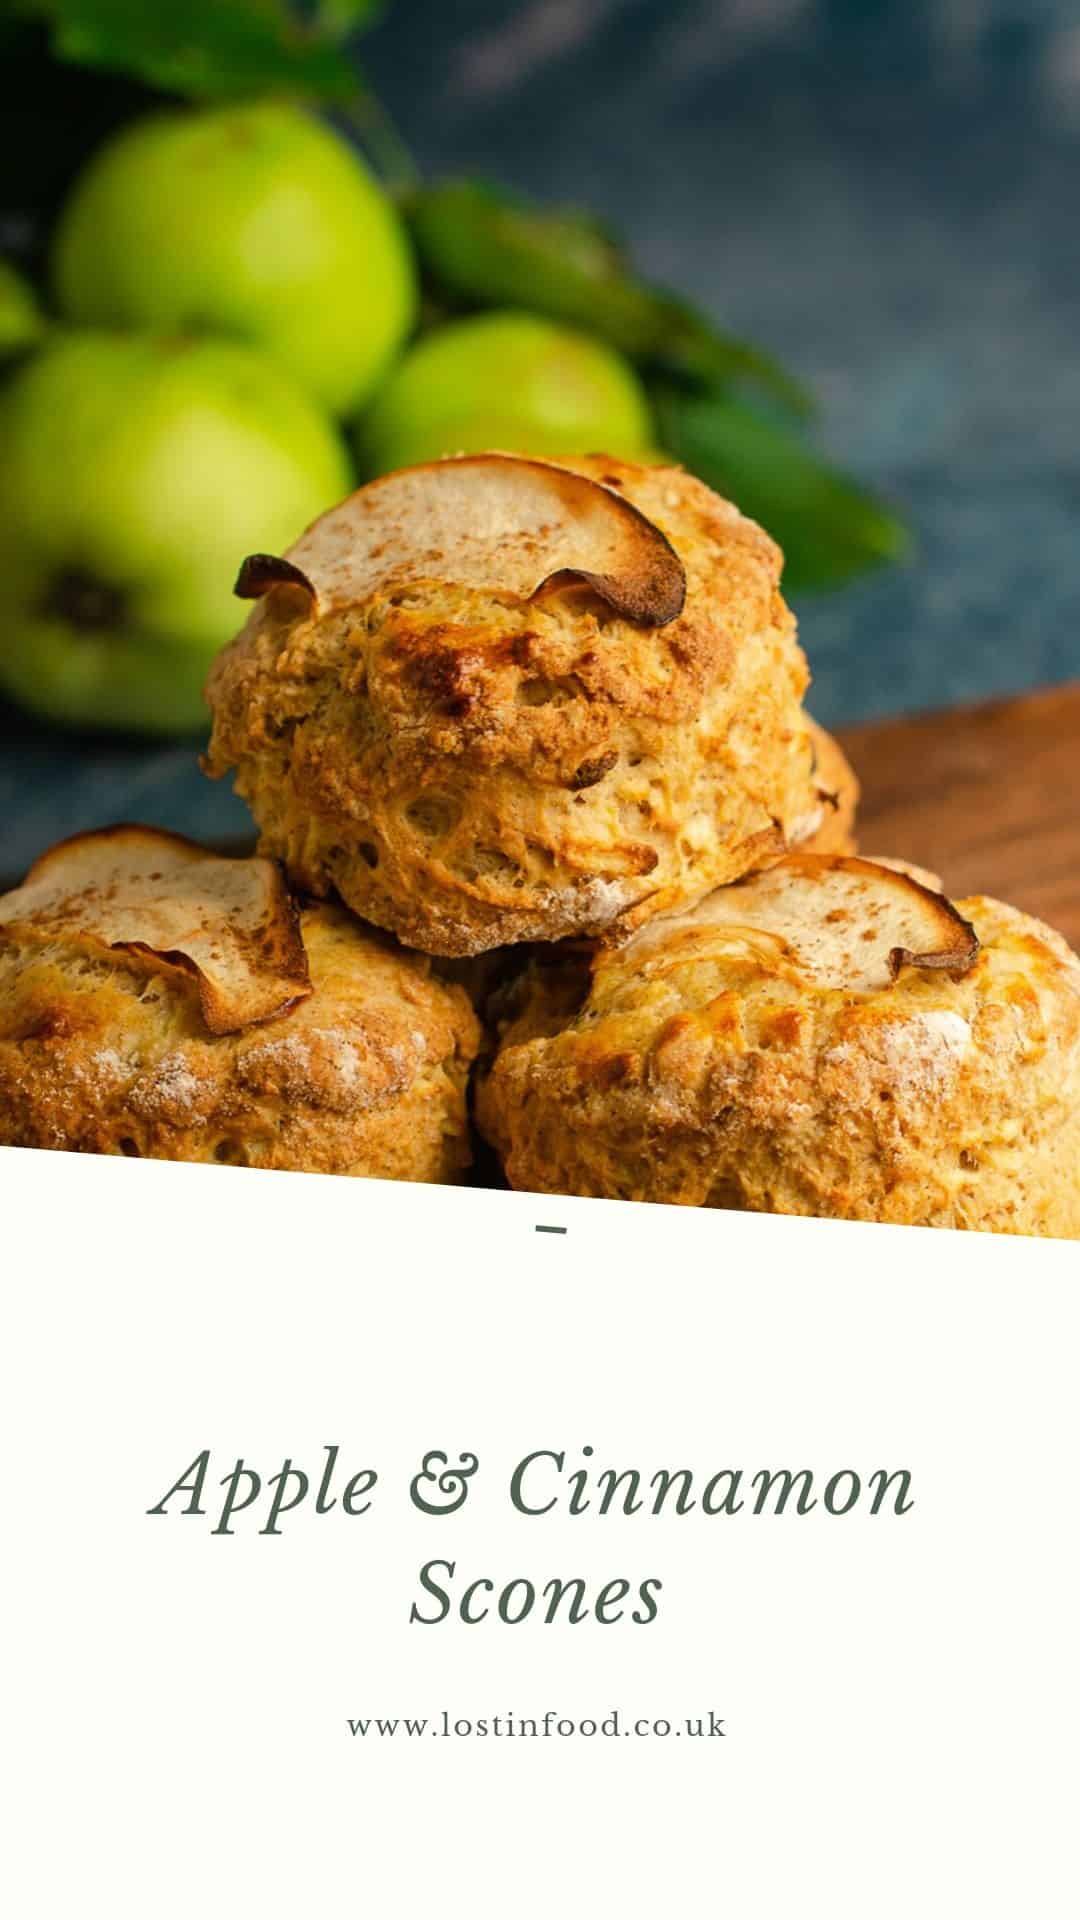 Fresh apple and cinnamon scones piled on a wooden board with freshly picked green apples still with their leaves on just slightly blurred in the background and a white banner at the bottom of the image with Apple & Cinnamon Scones and Lost in Food as the author.